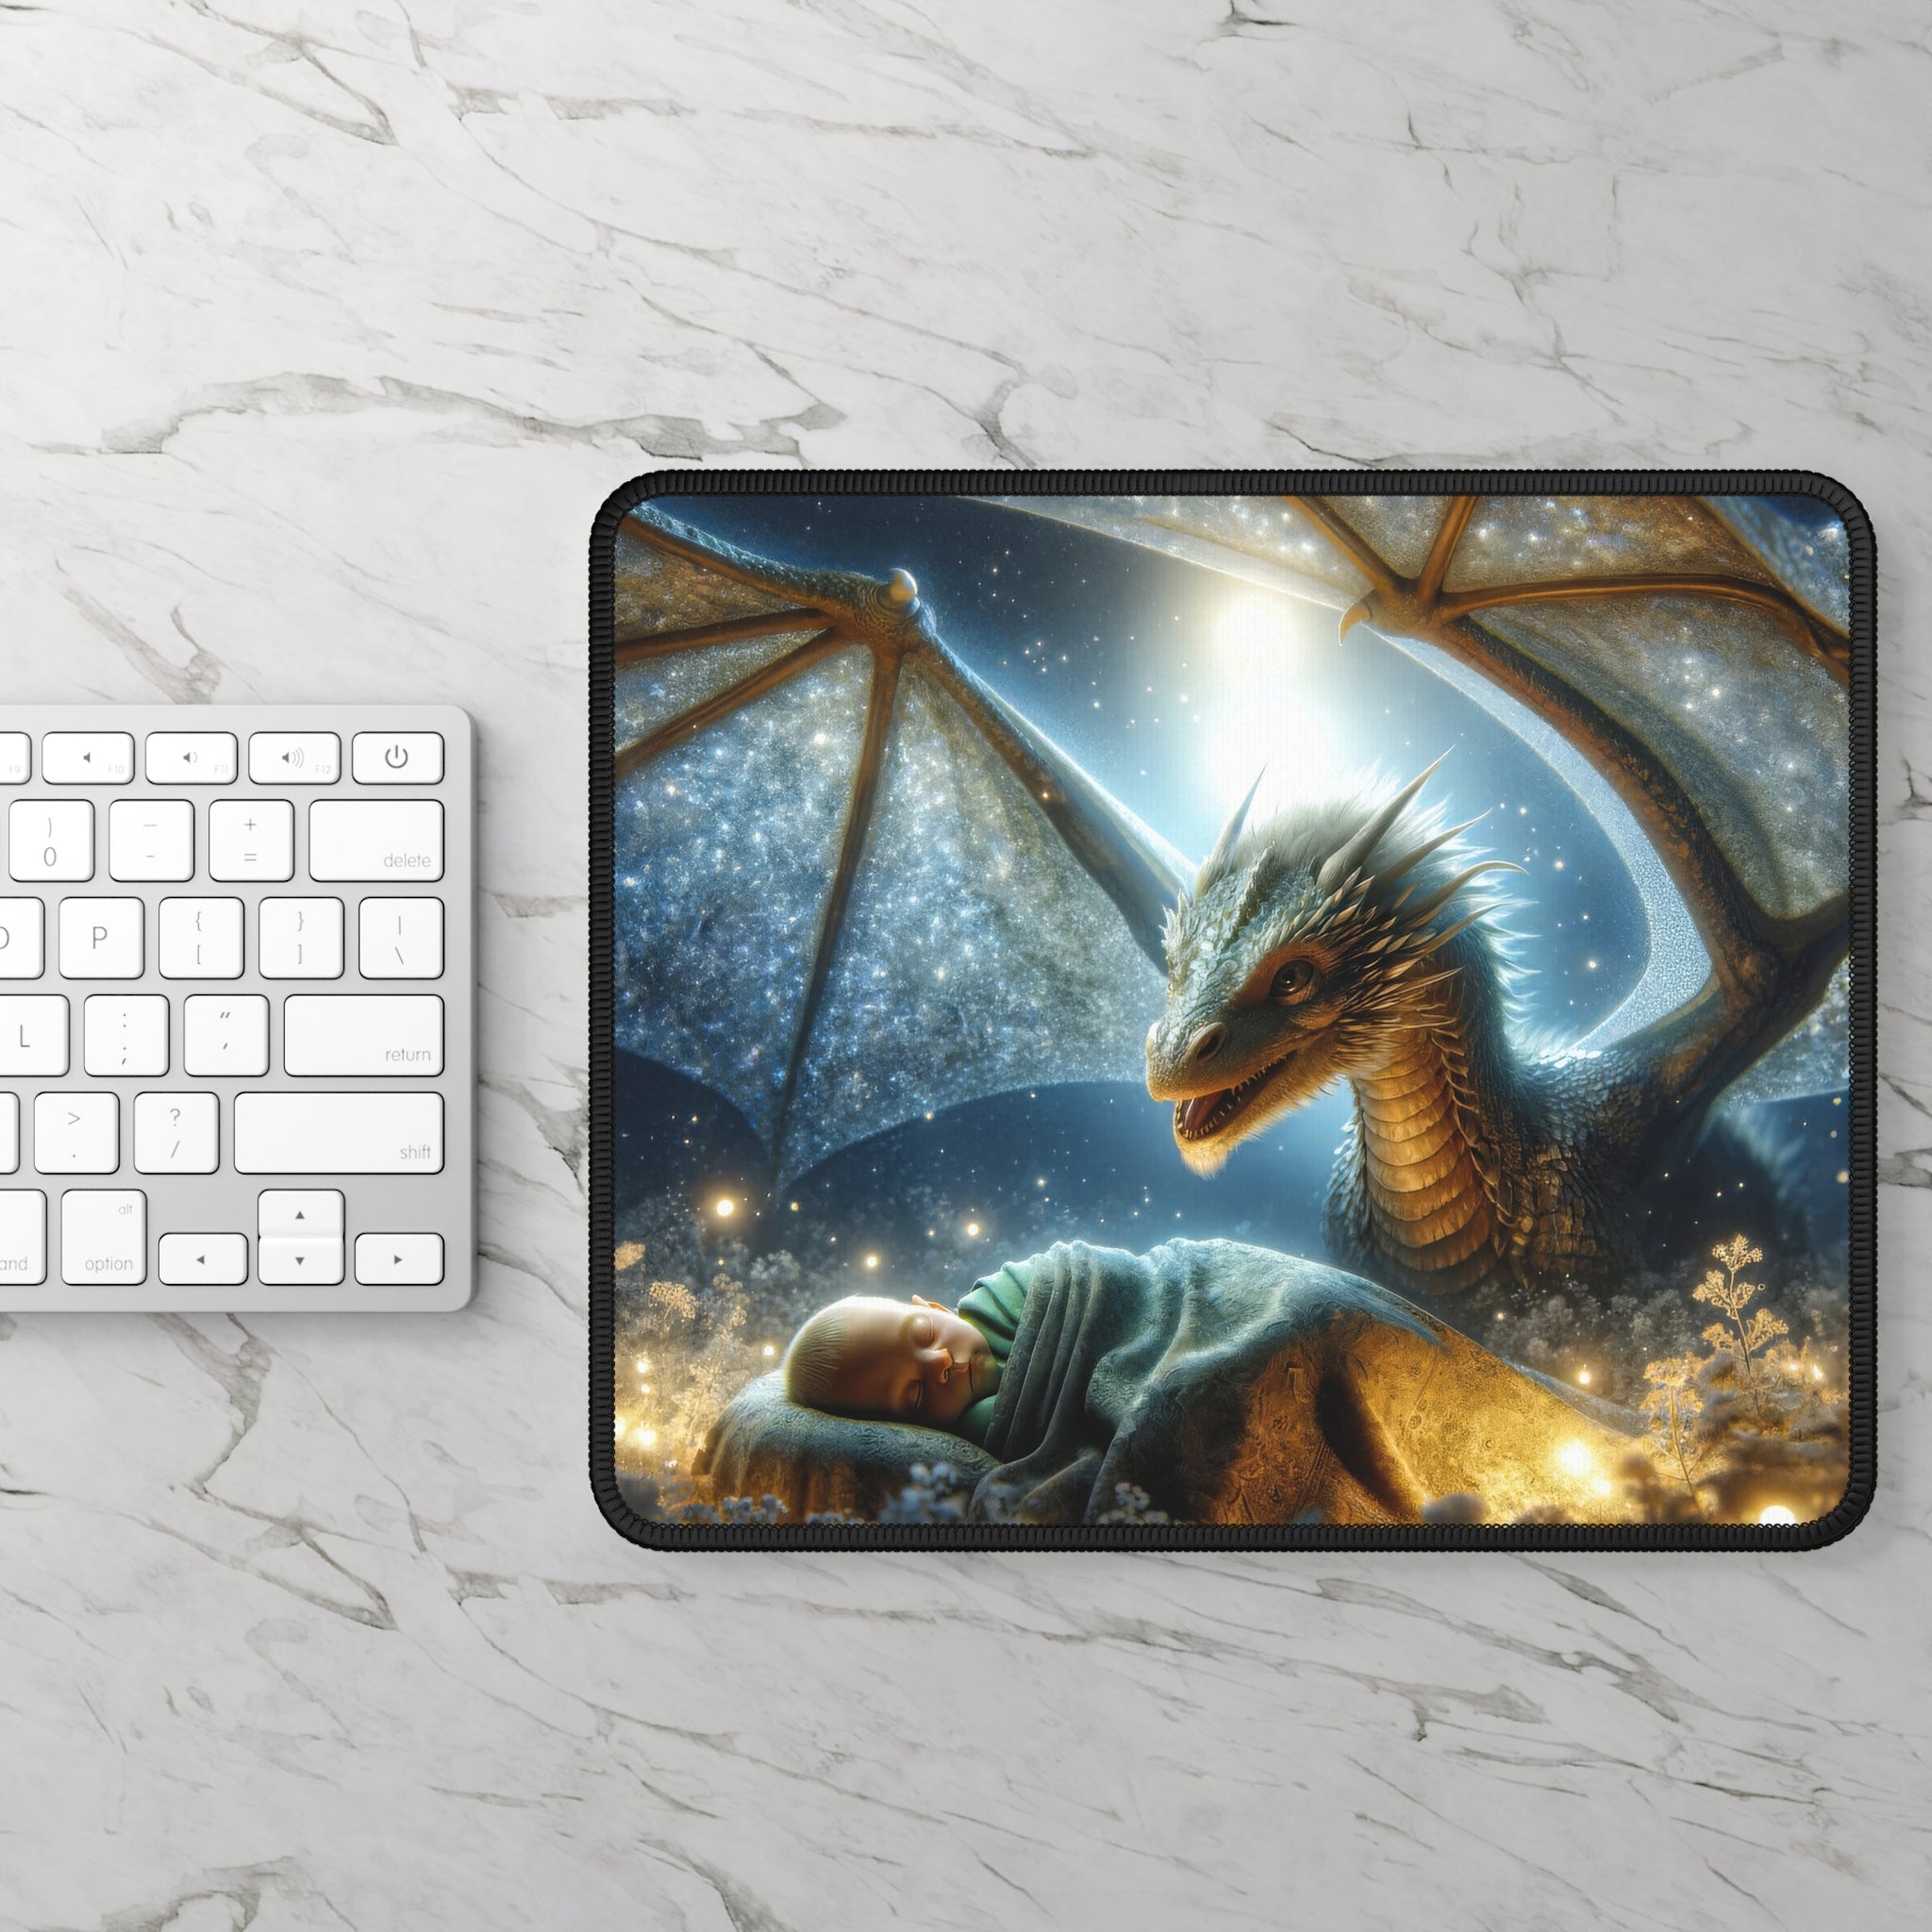 Nightwatch of the Starry Sentinel Mouse Pad